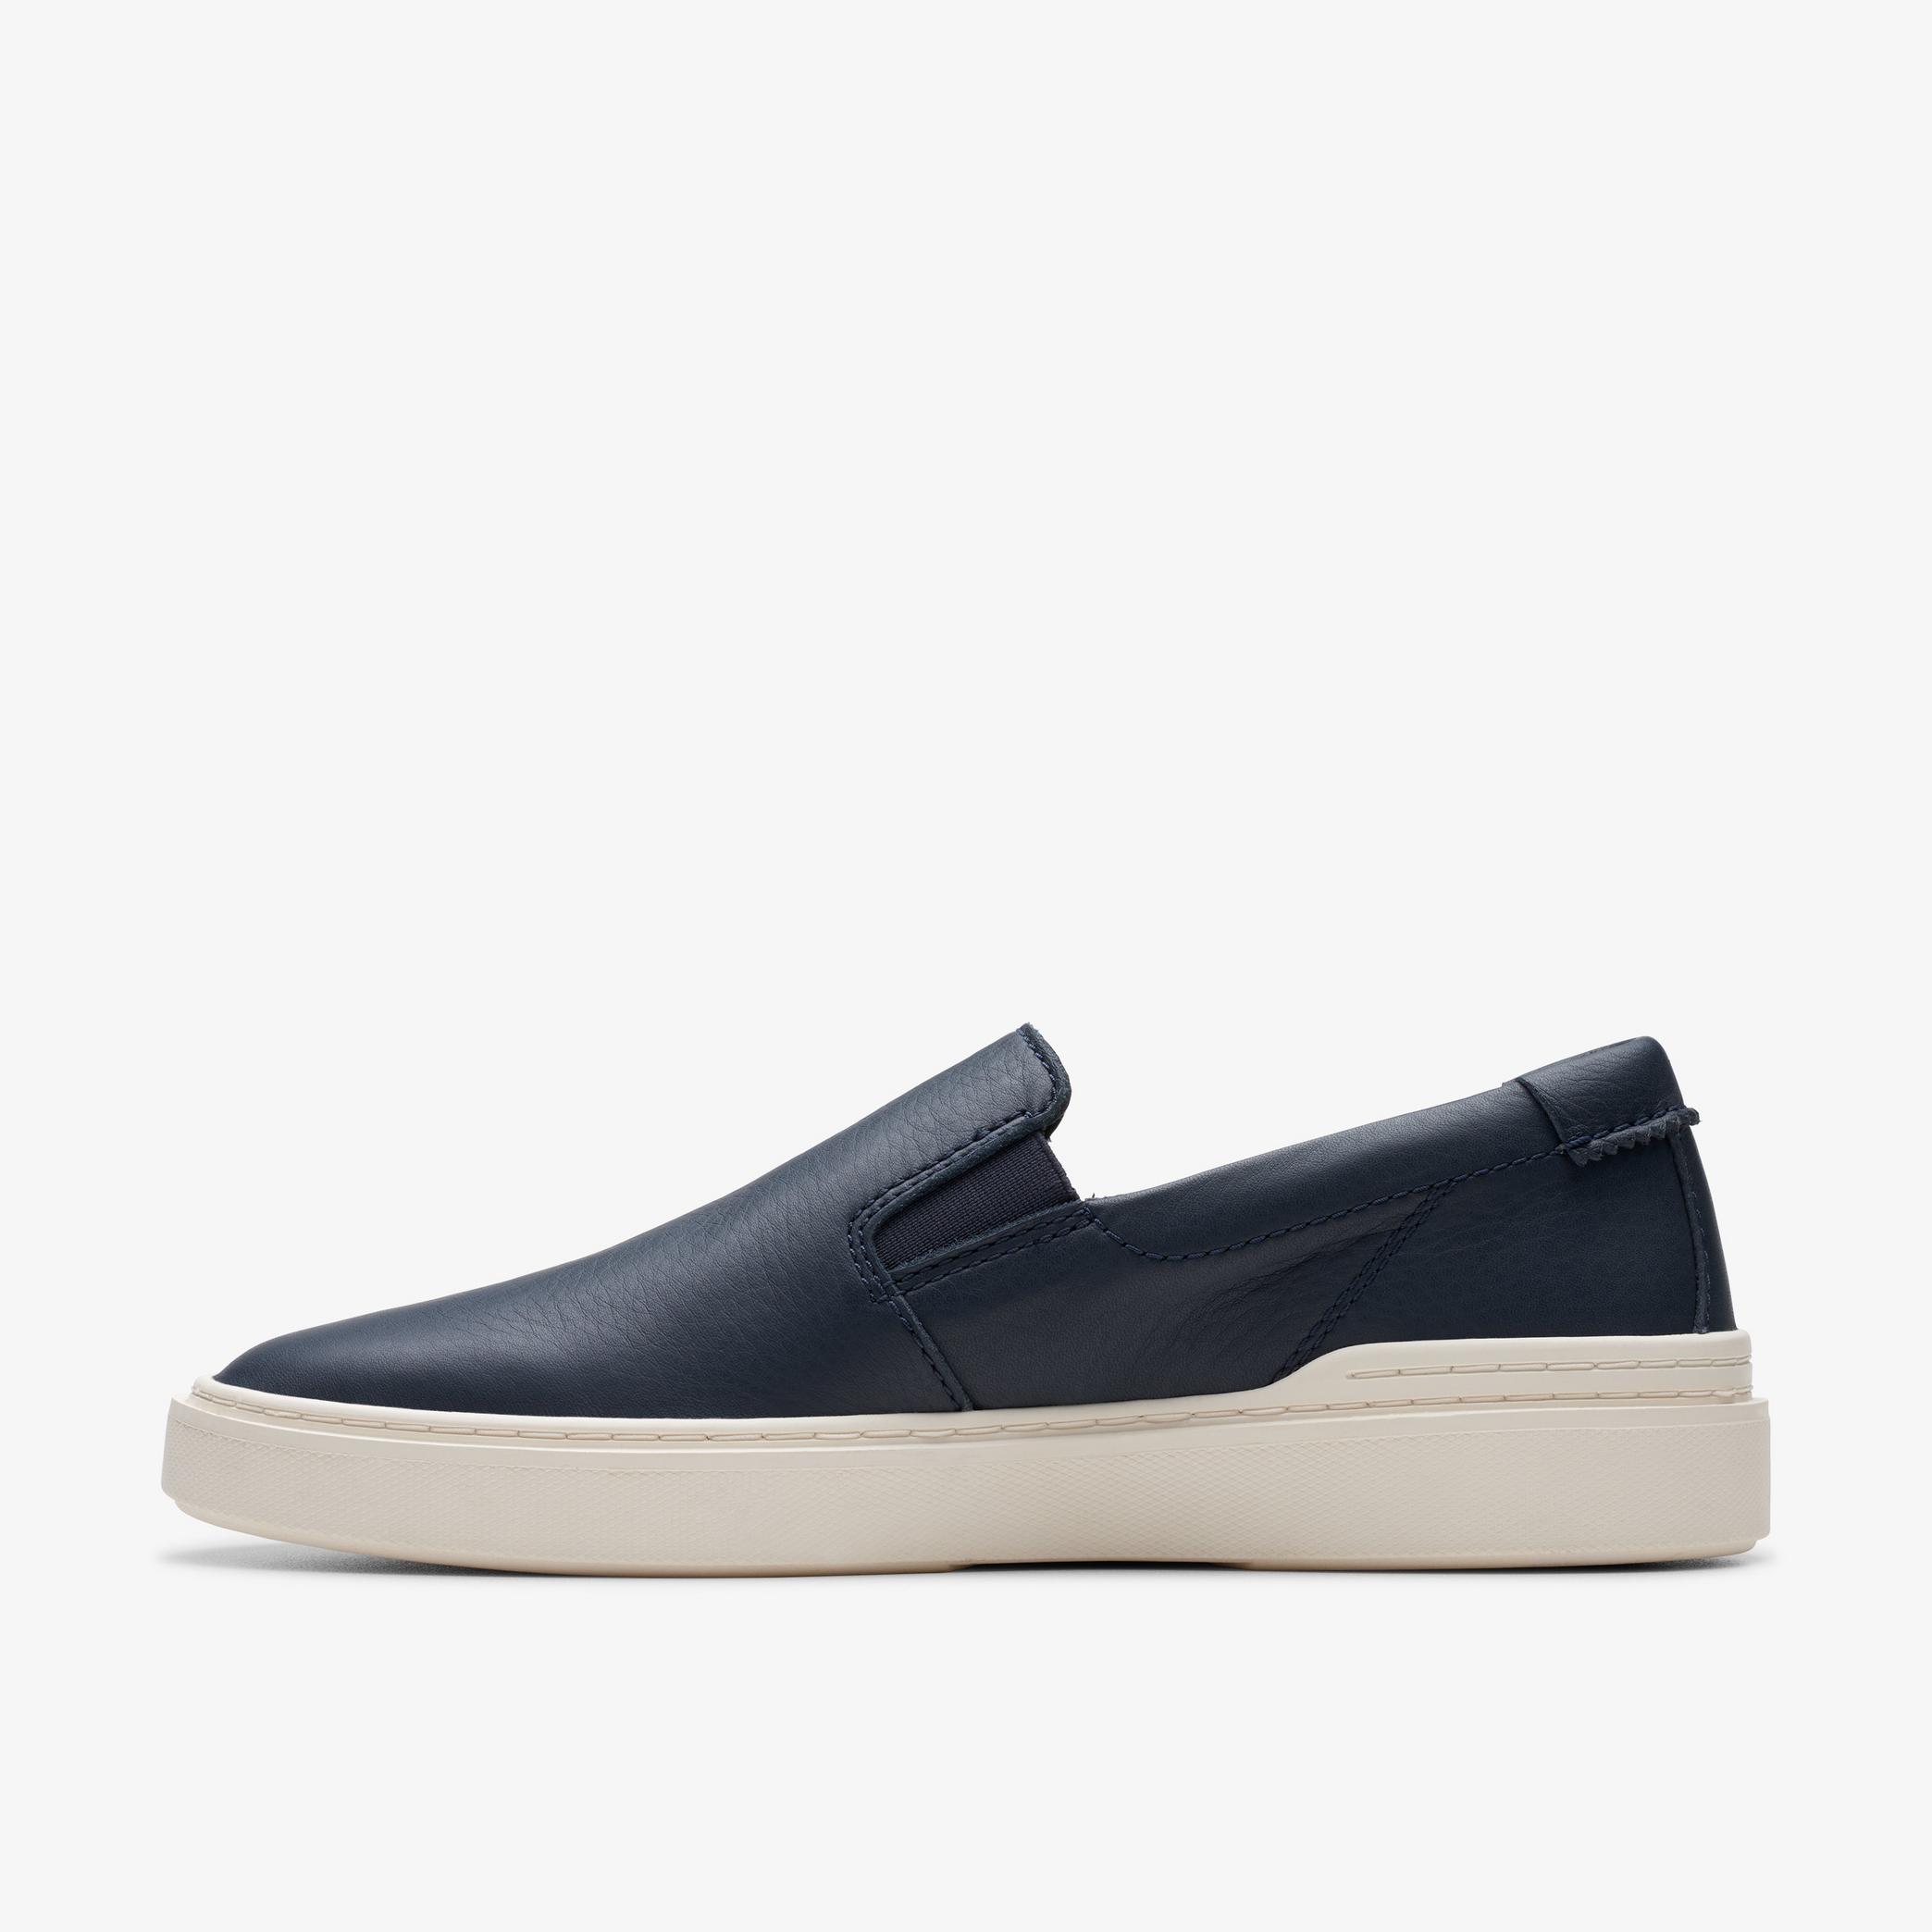 CRAFT SWIFT GO Navy Leather Slip Ons, view 2 of 6